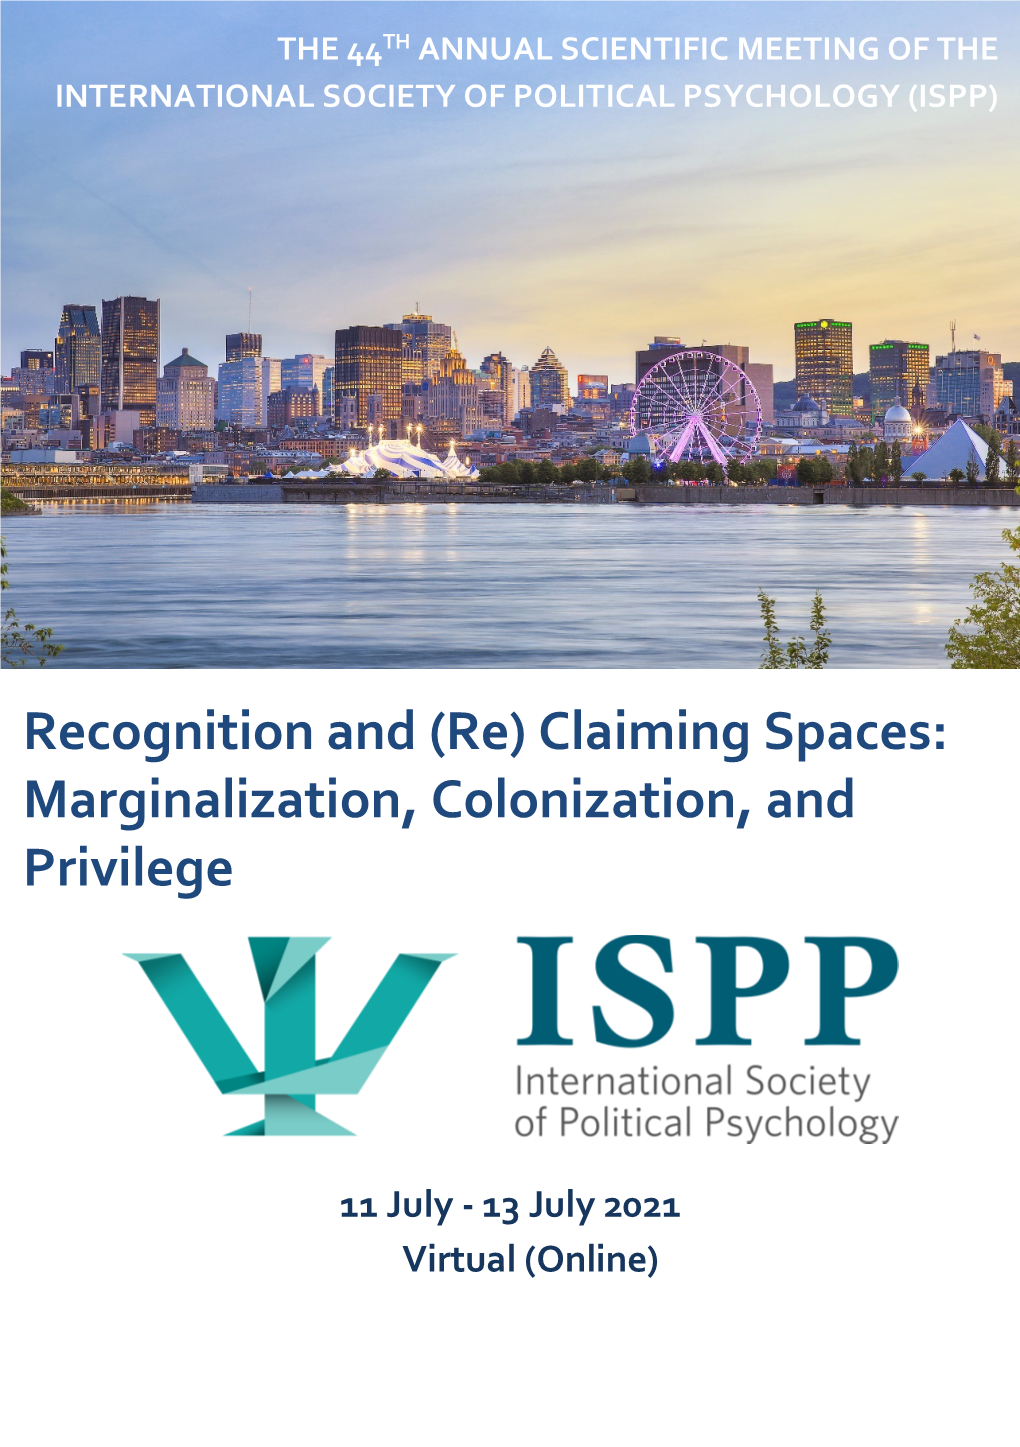 Recognition and (Re) Claiming Spaces: Marginalization, Colonization, and Privilege